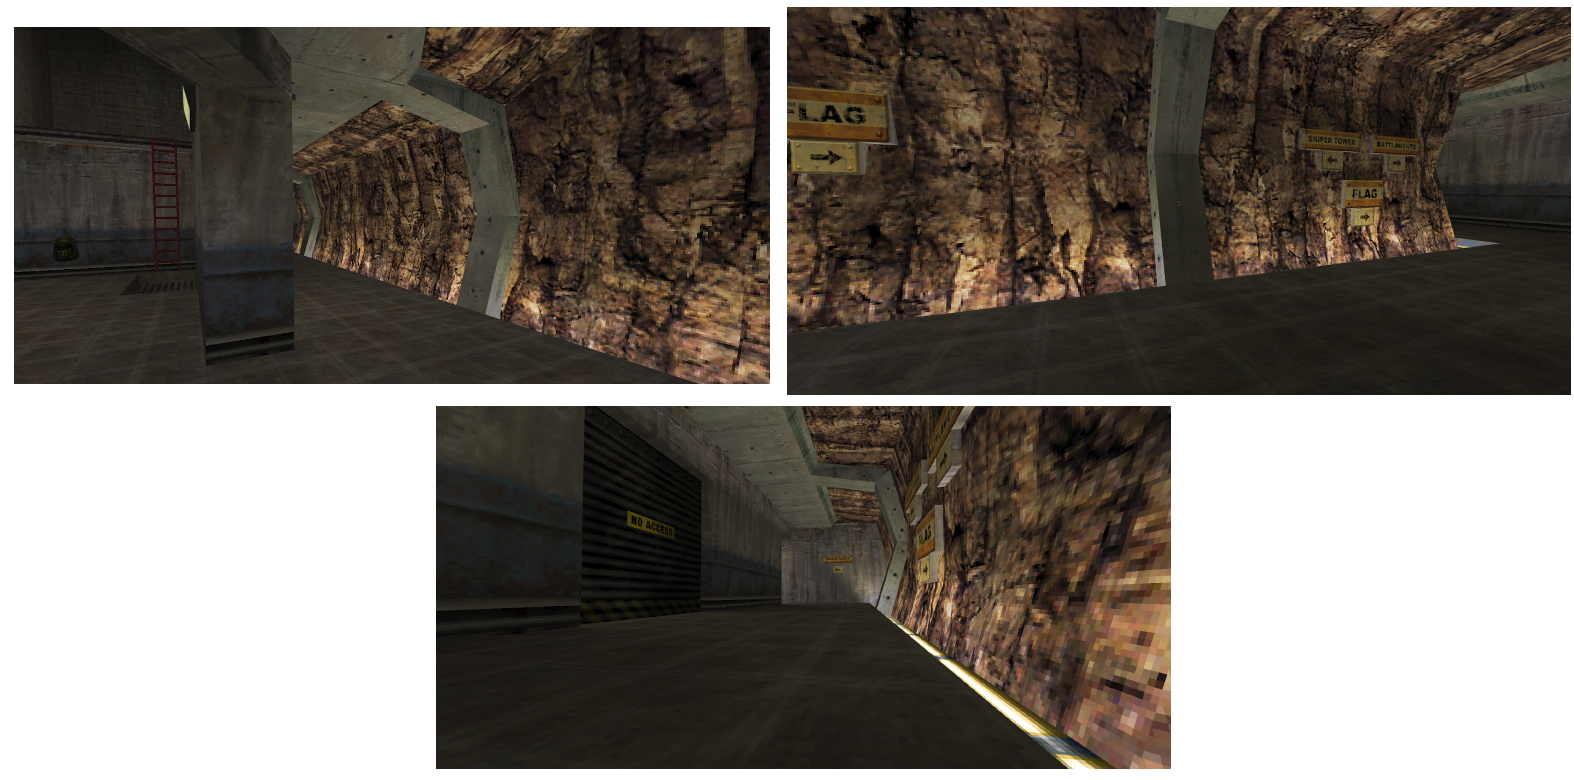 Left: Team Fortress Classic Badlands flag room, depicting the hallway leading out to the battlements. Right: Hallway leading to the battlements, facing the flag room. Bottom: Alternate angle of the hallway leading to the battlements.